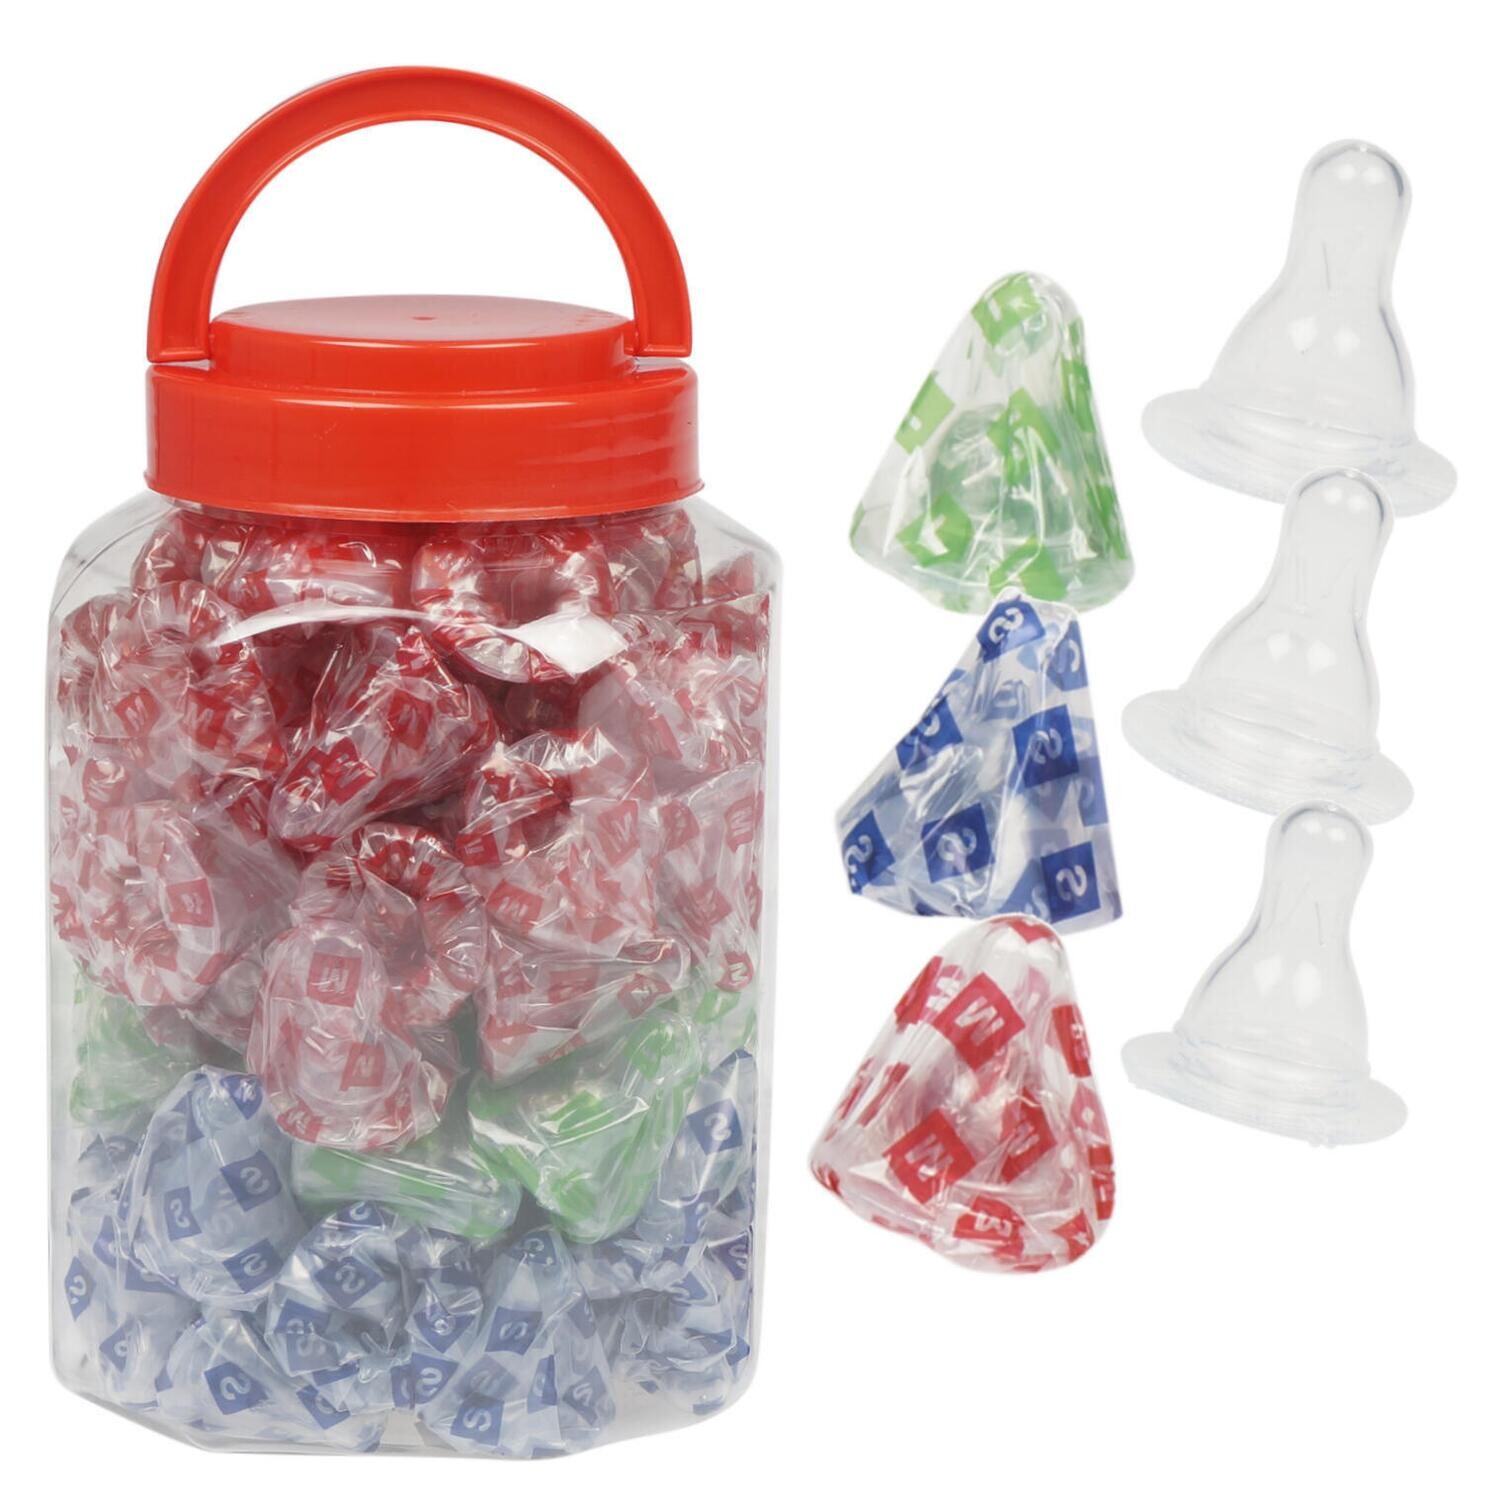 . Case of [600] Silicone Baby Bottle Nipples - Assorted Flows .